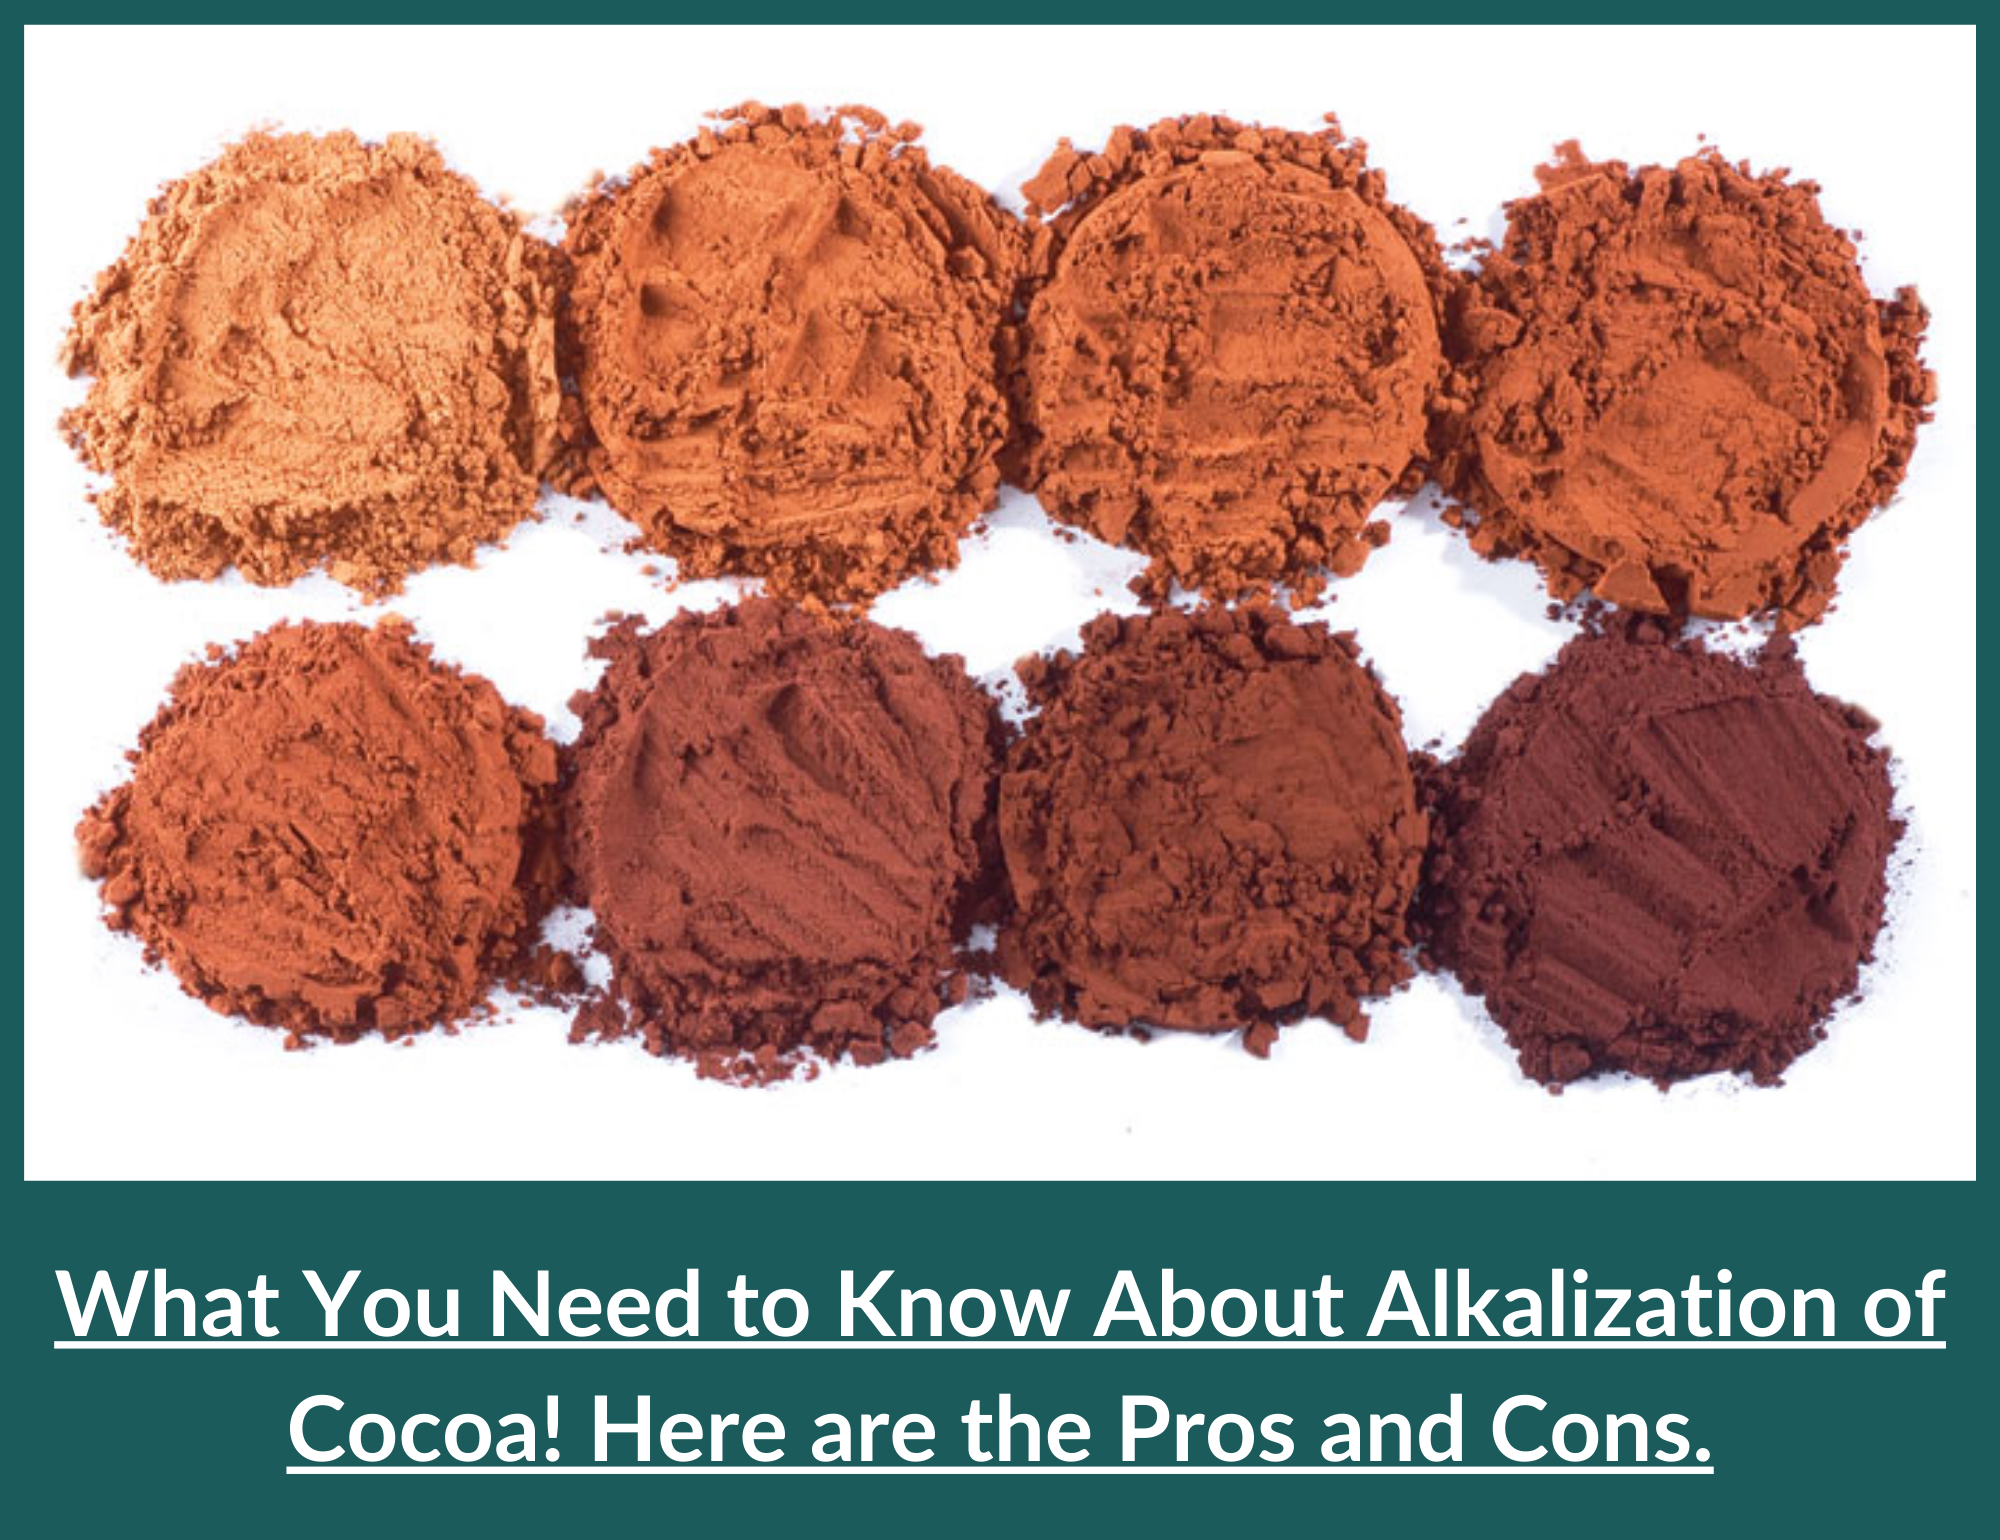 Alkalization of Cocoa: Pros and Cons.